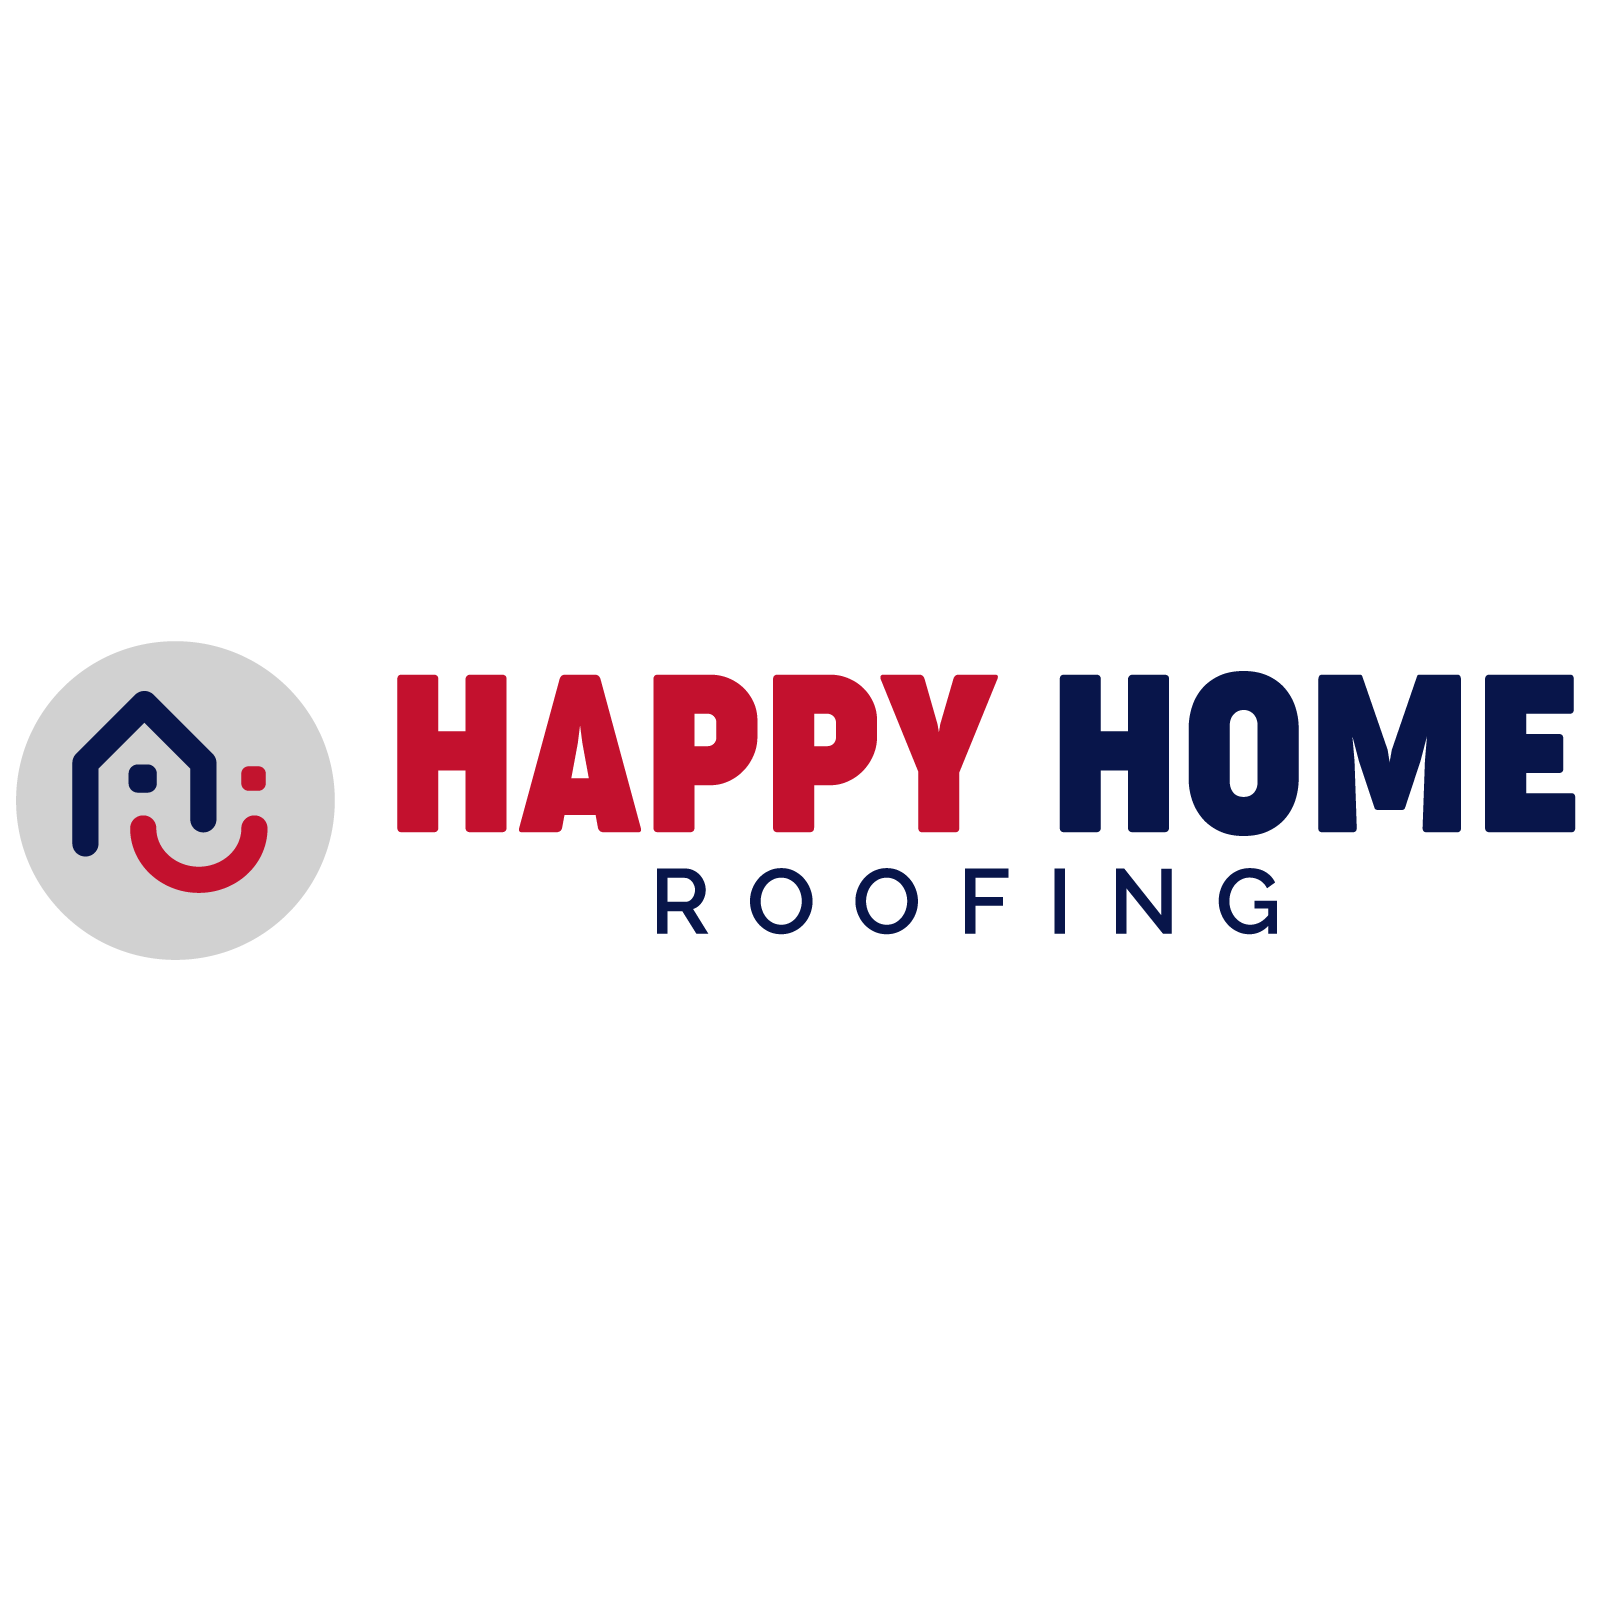 Happy Home Roofing - Hagerstown, MD 21742 - (833)384-2779 | ShowMeLocal.com